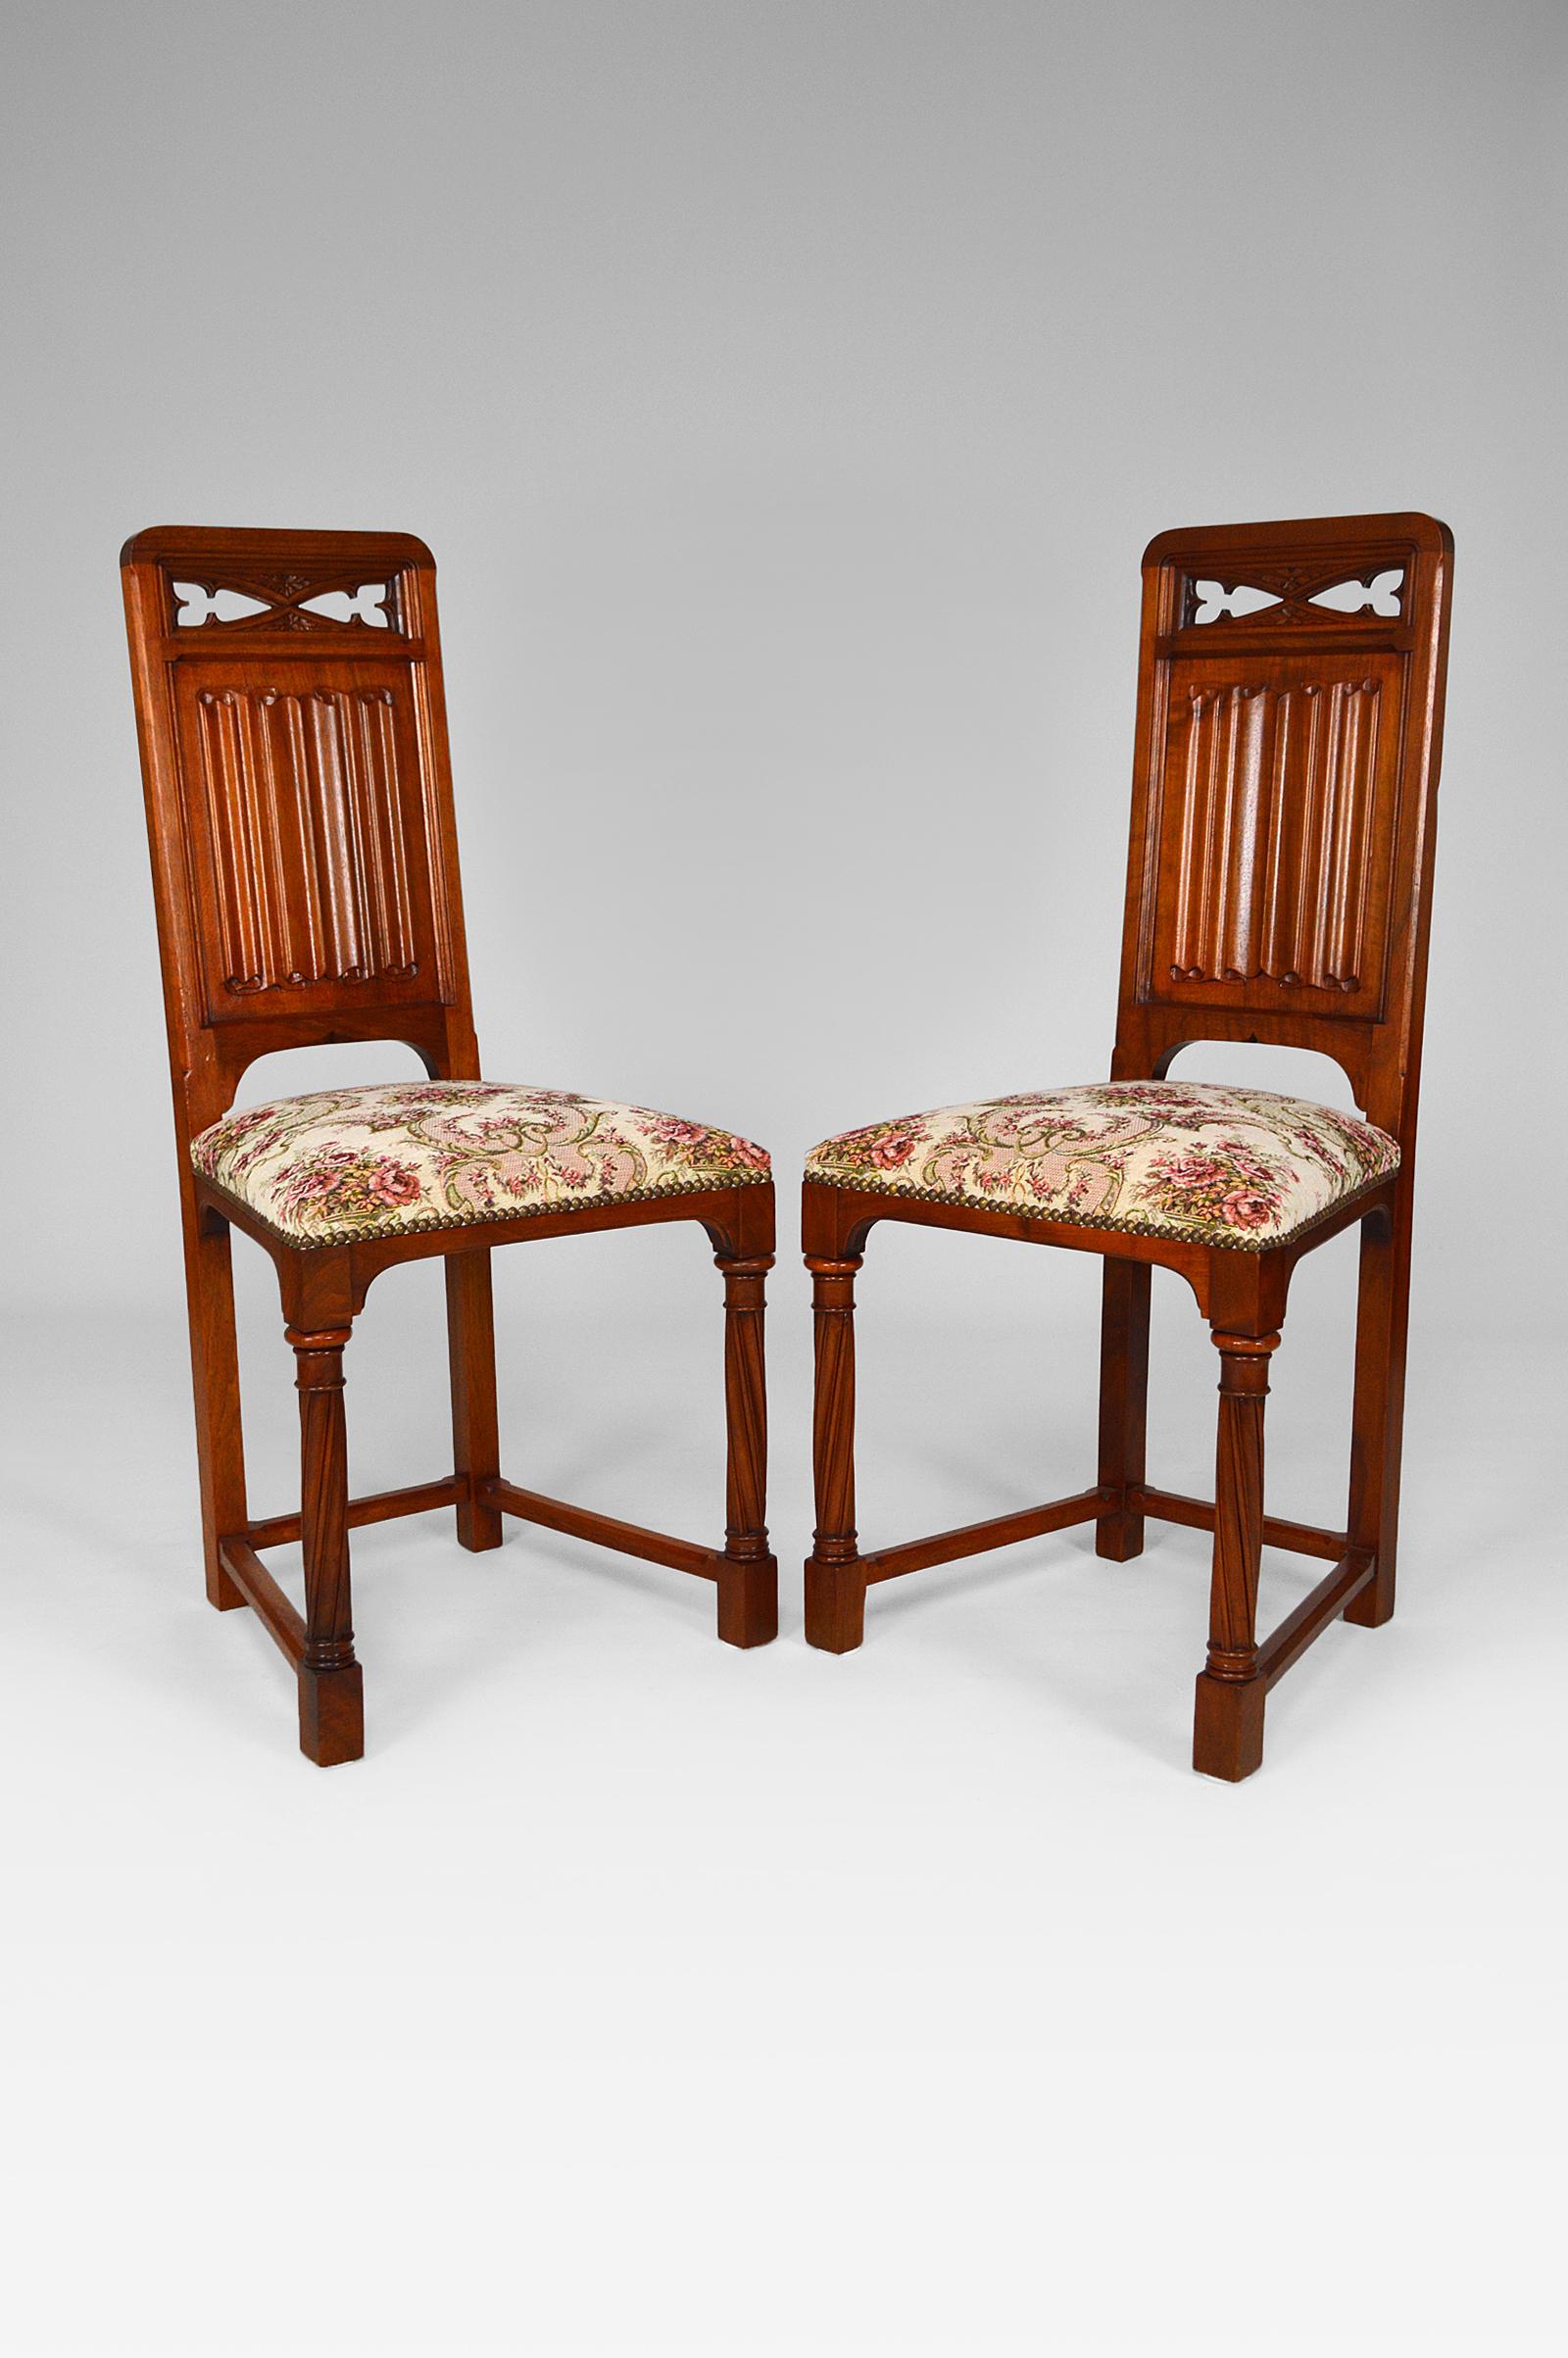 French Pair of Antique Victorian Gothic Revival Chairs in Carved Walnut, 19th Century For Sale